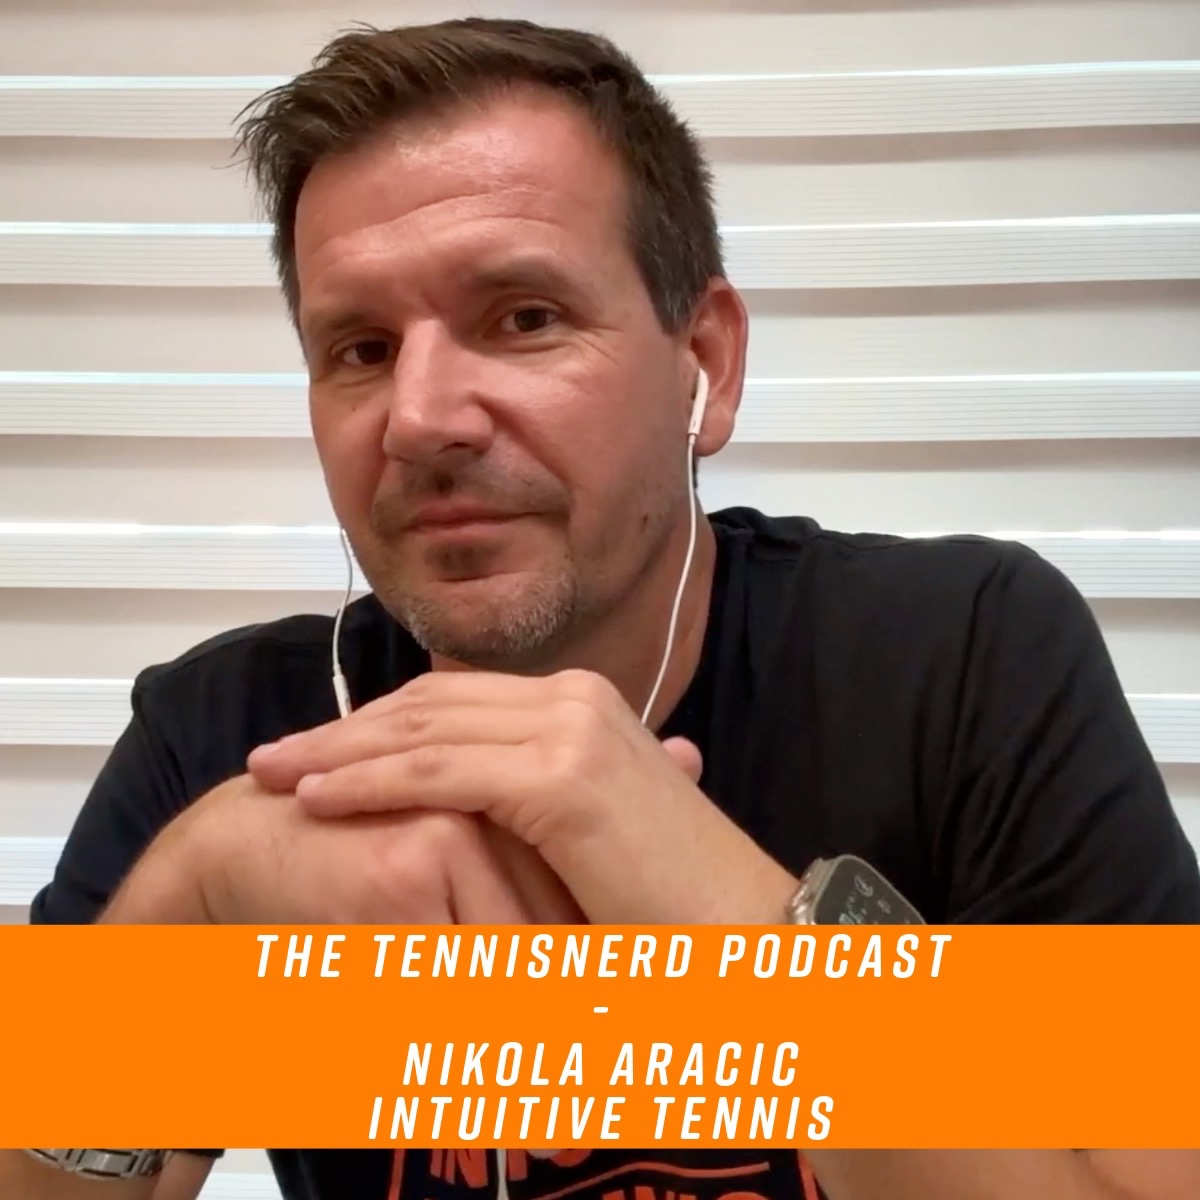 Nikola Aracic is back to discuss racquets, the Australian Open and more